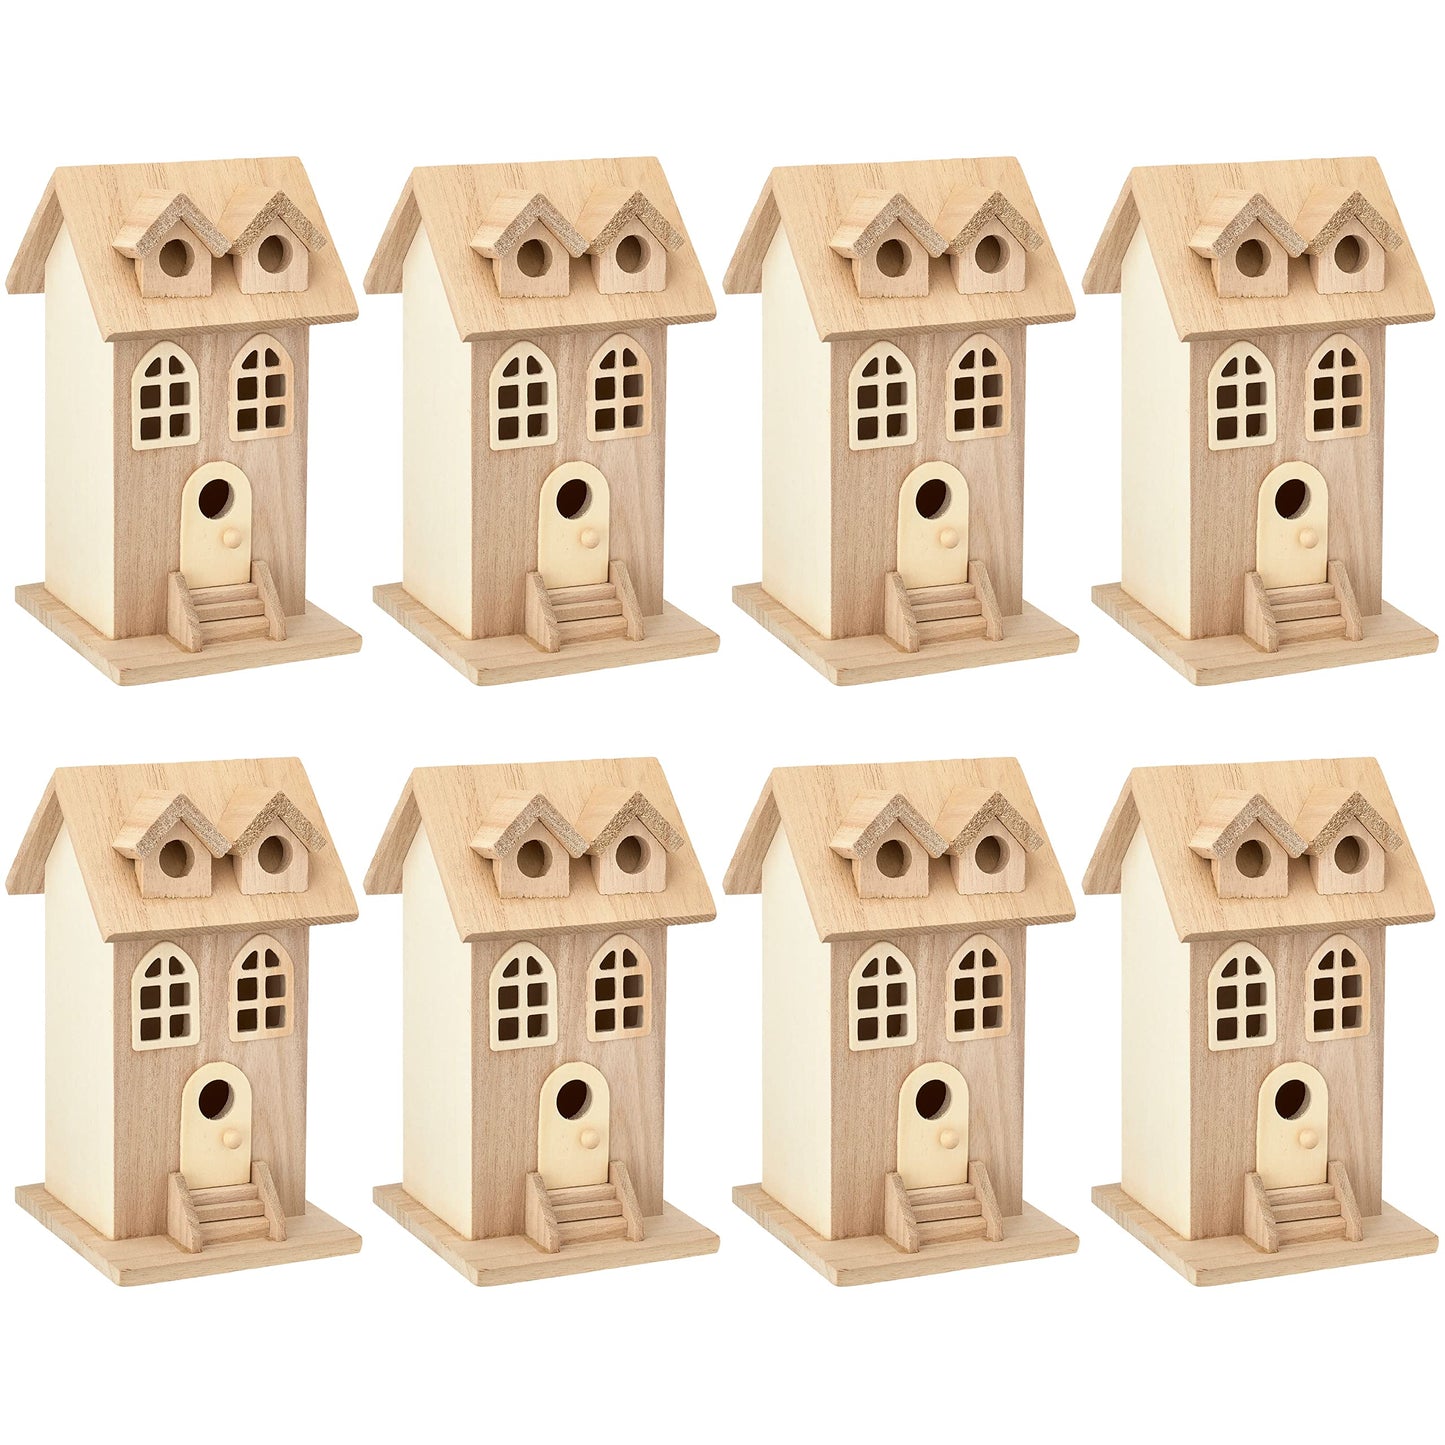 7.5" Wooden Townhouse Birdhouse by Make Market - Unfinished Birdhouse Made of 100% Wood, Outdoor Nesting Boxes - Bulk 6 Pack